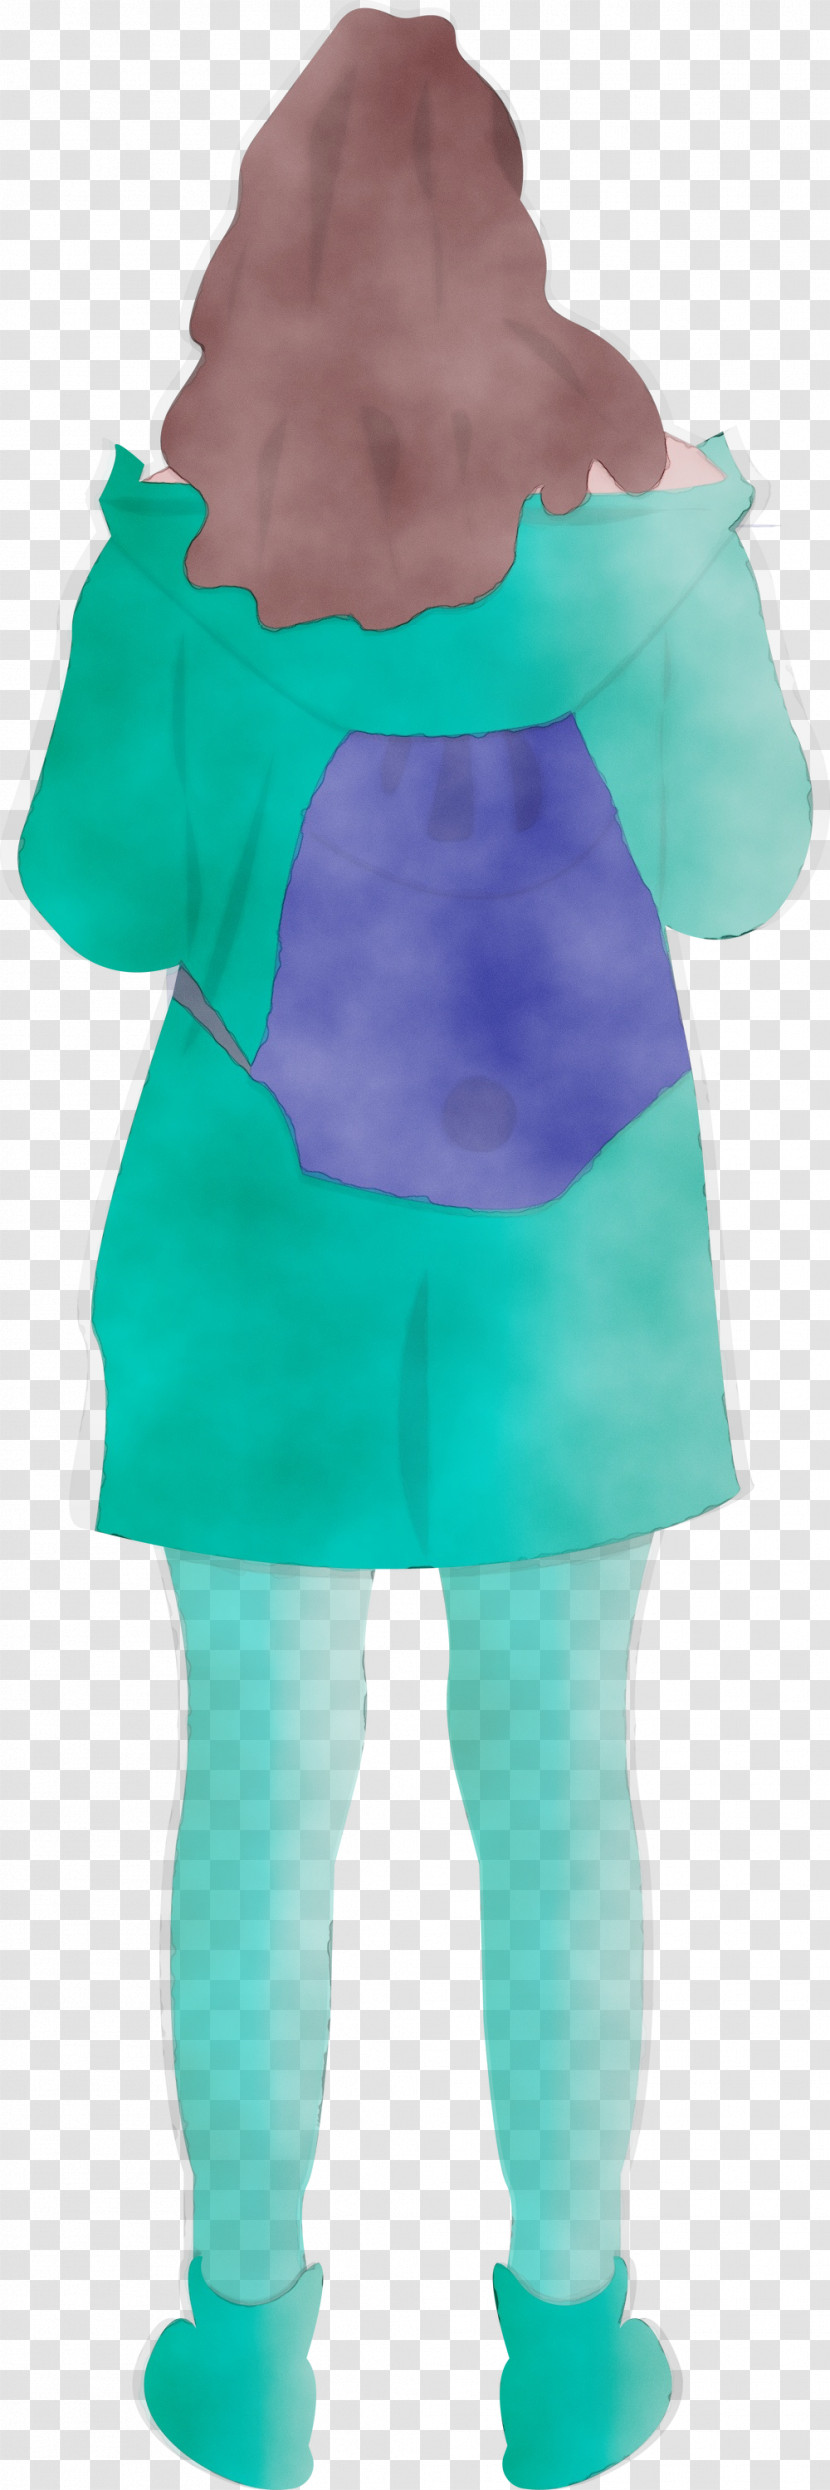 Clothing Green Blue Turquoise Teal Transparent PNG